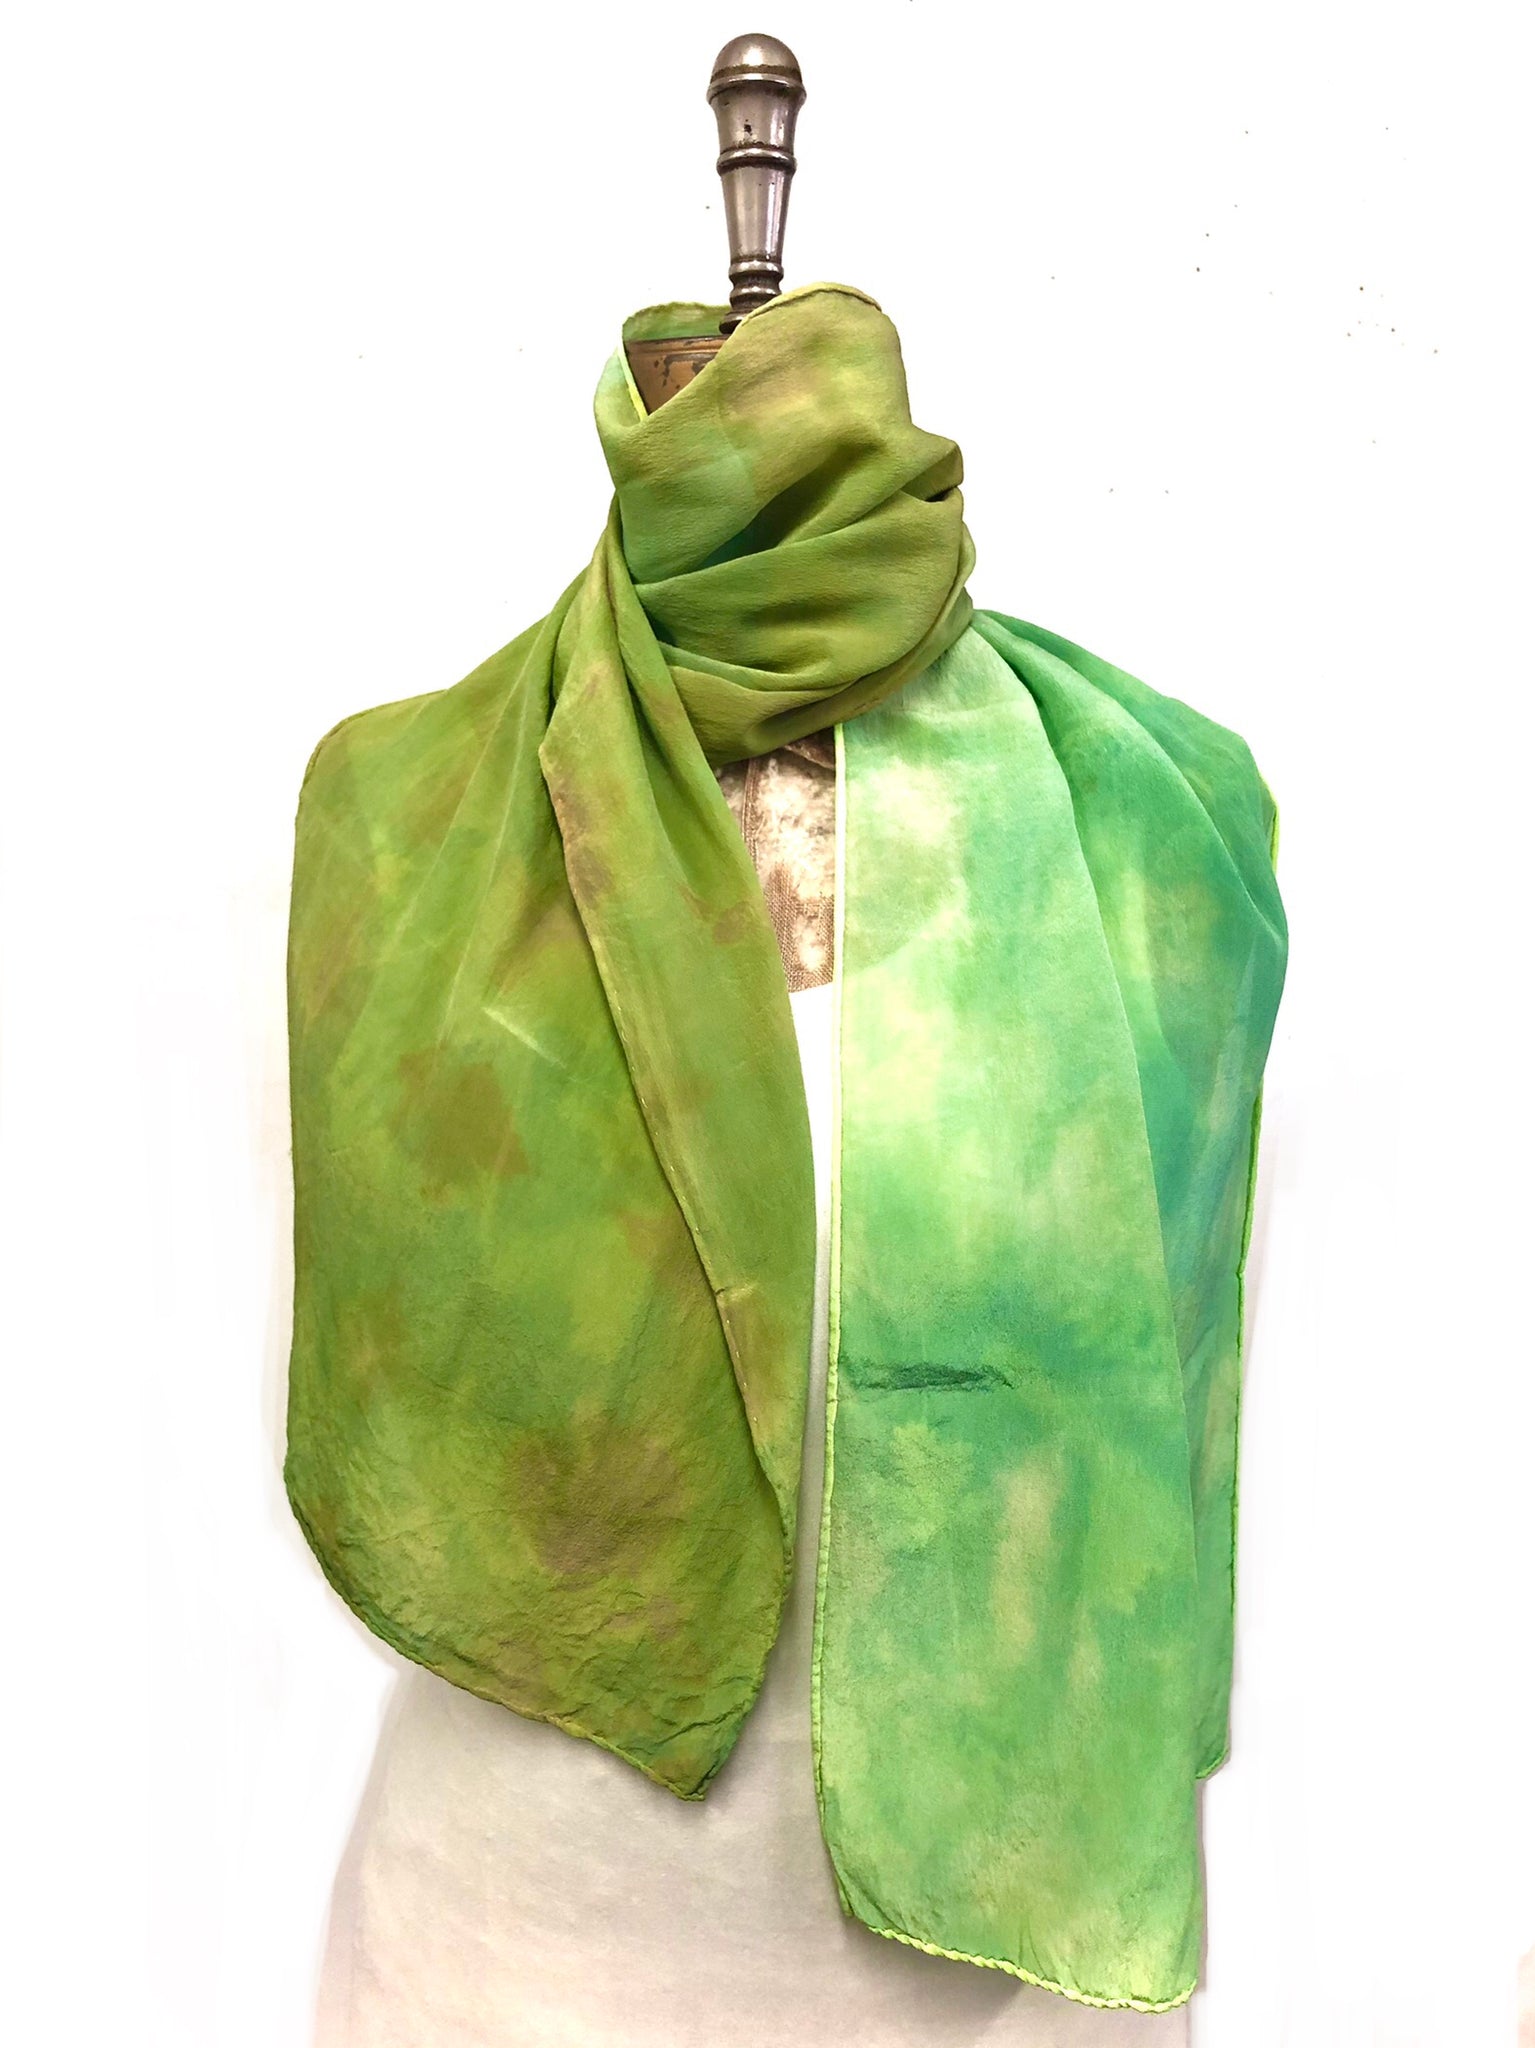 Naturally dyed silk scarf #50